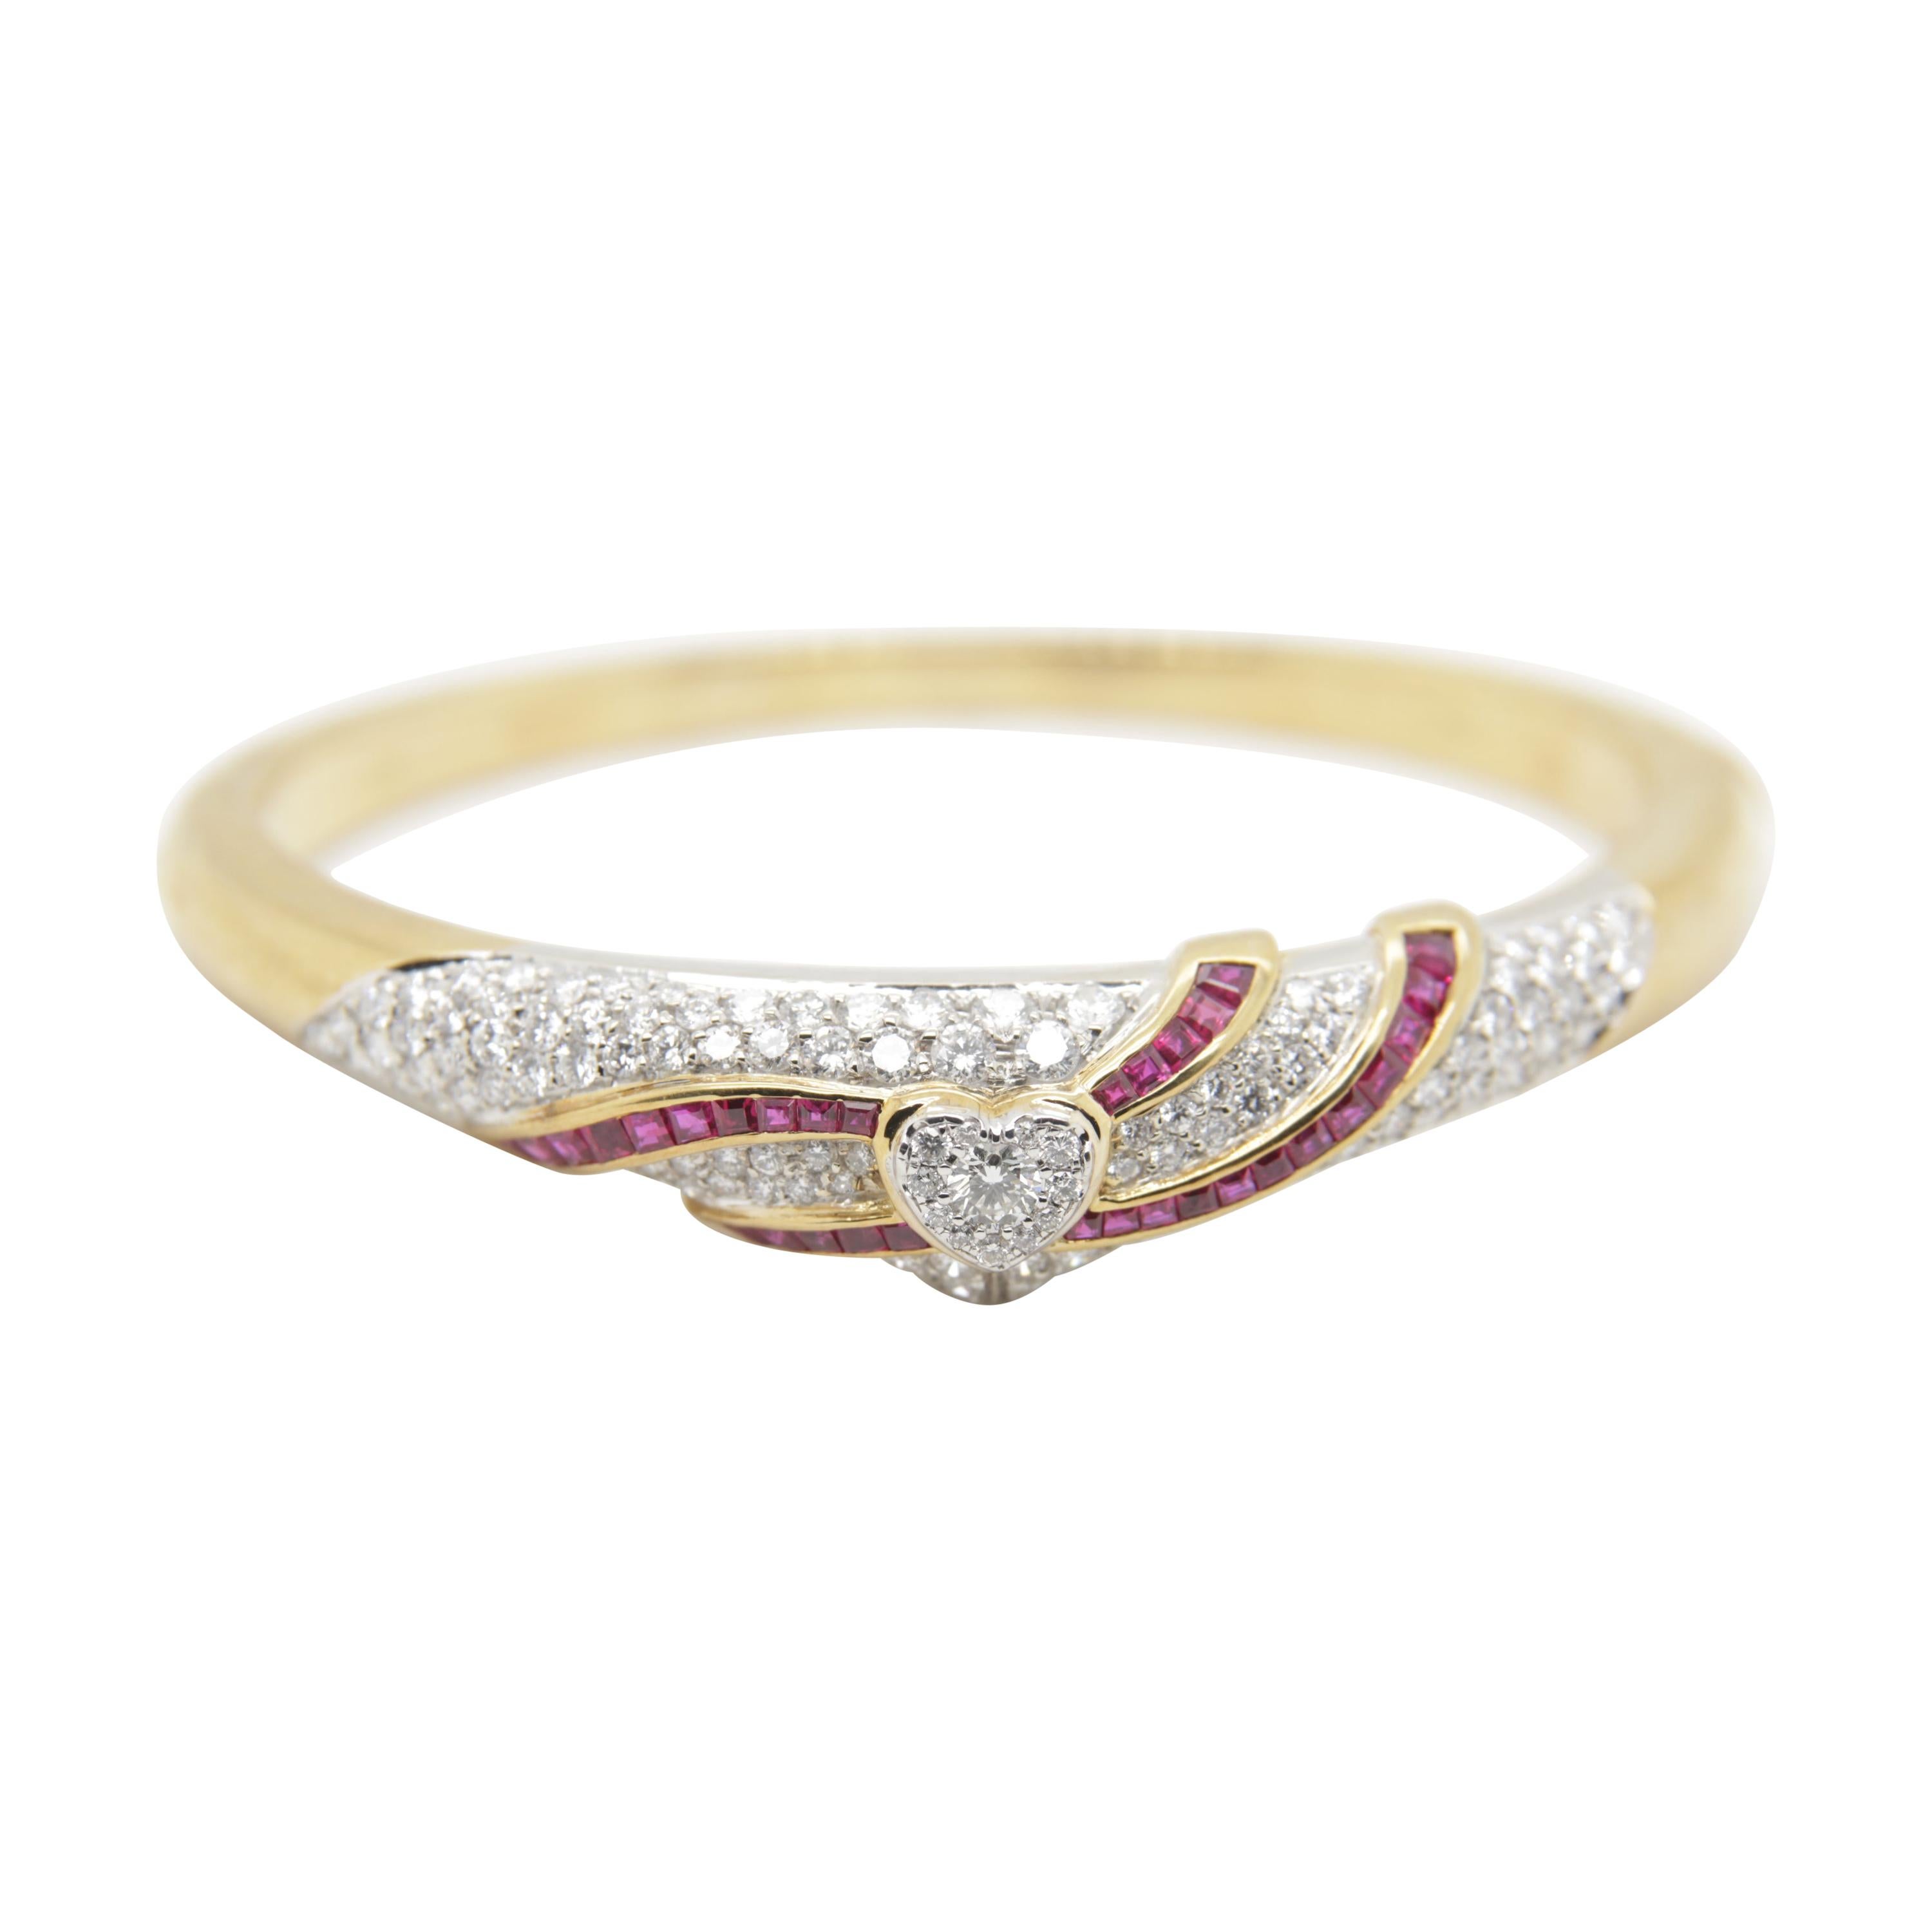 3.48 Carat Diamond and Ruby Bangle in 18 Karat Gold For Sale